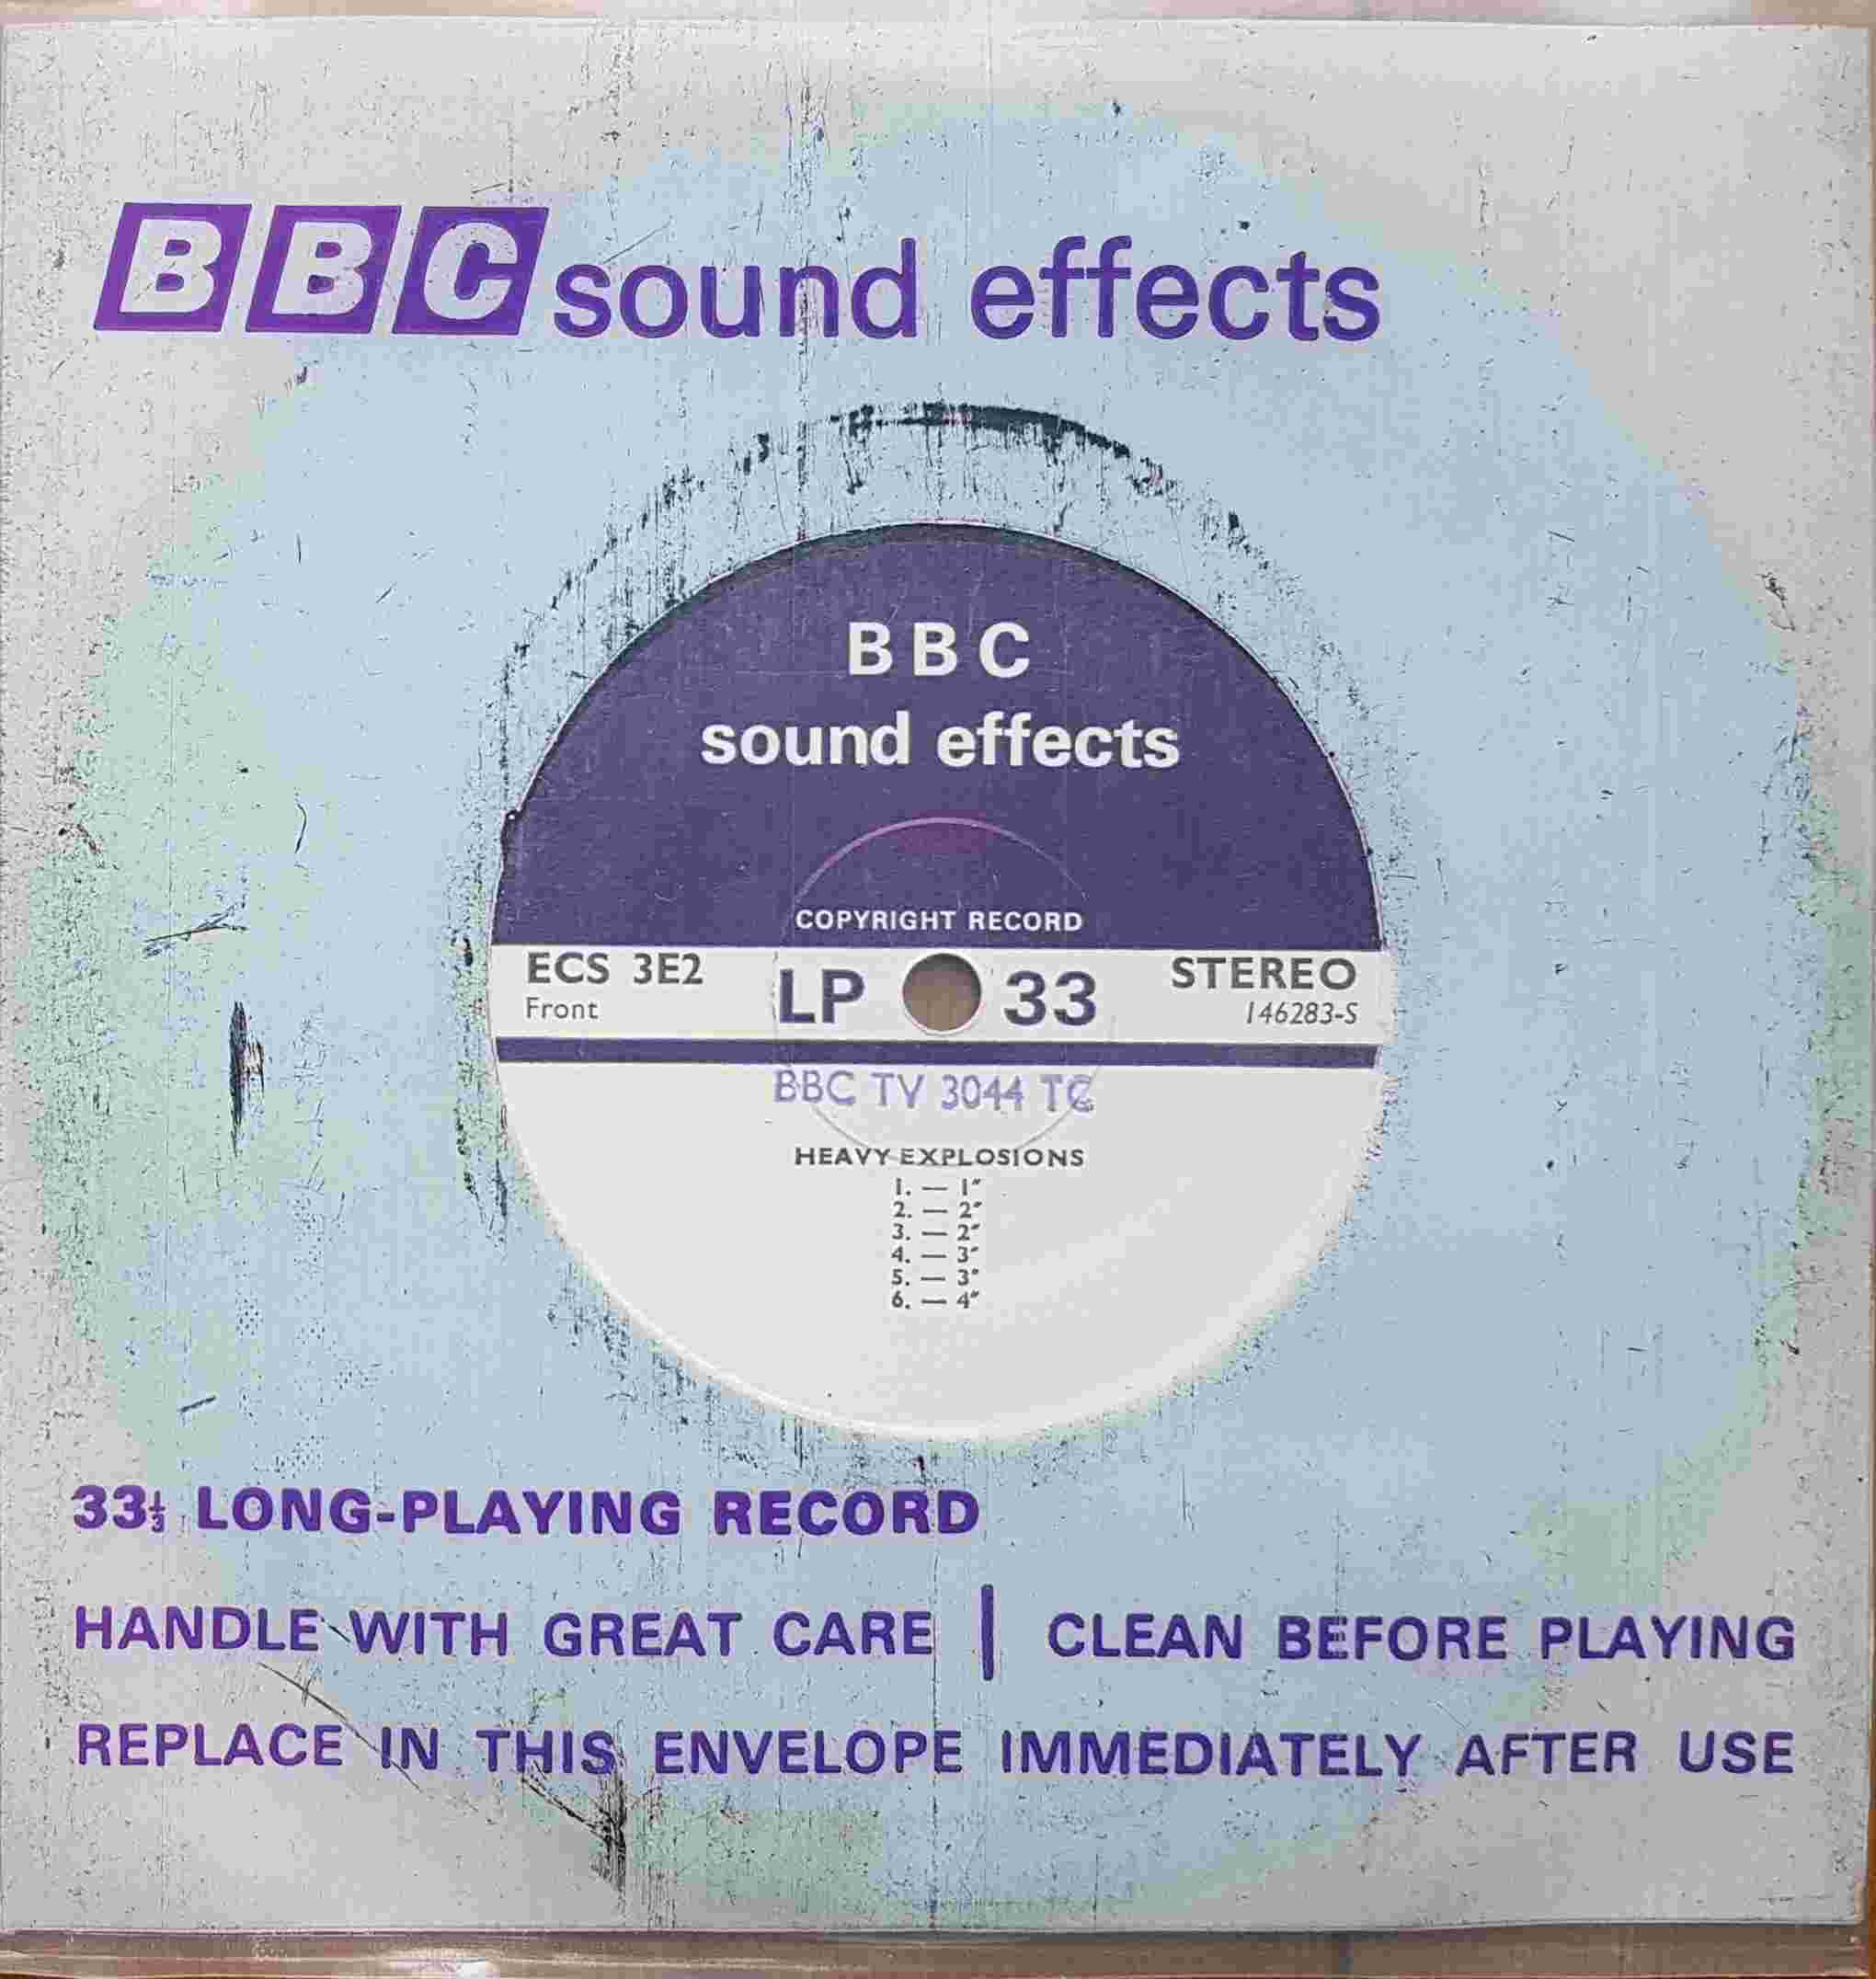 Picture of ECS 3E2 Heavy explosions by artist Not registered from the BBC records and Tapes library